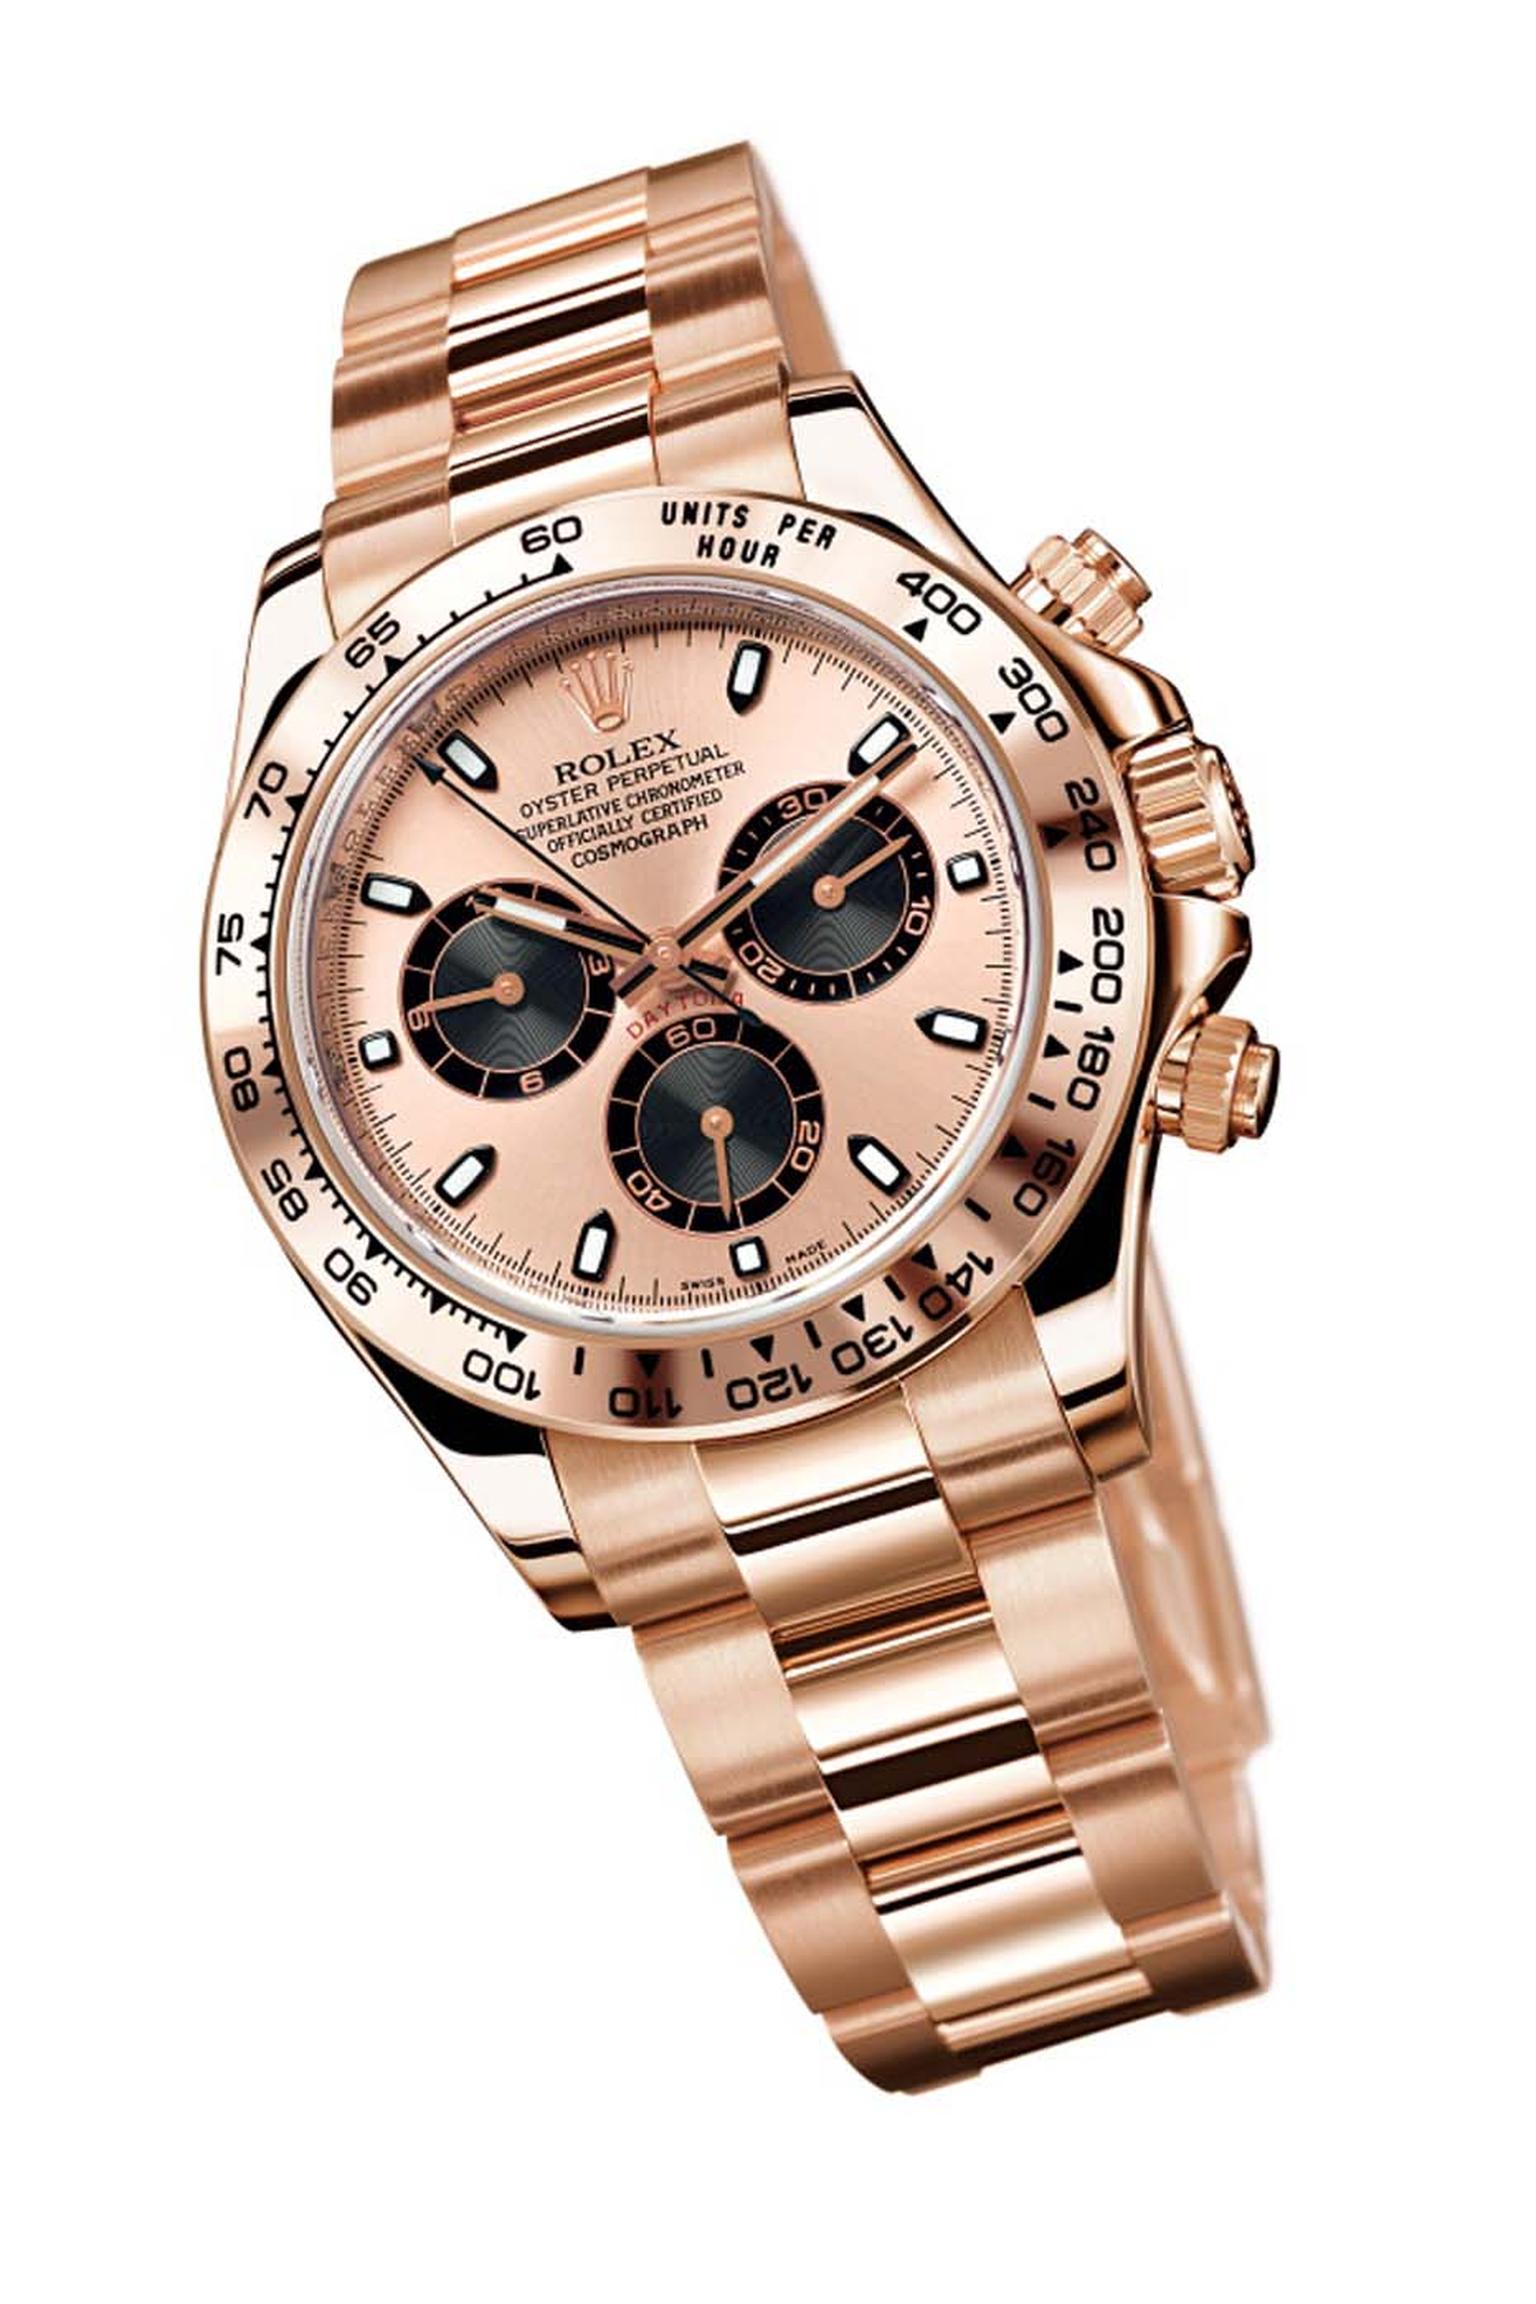 Rolex Cosmograph Daytona Everose watch, with a rose gold dial and bracelet, and black counters.